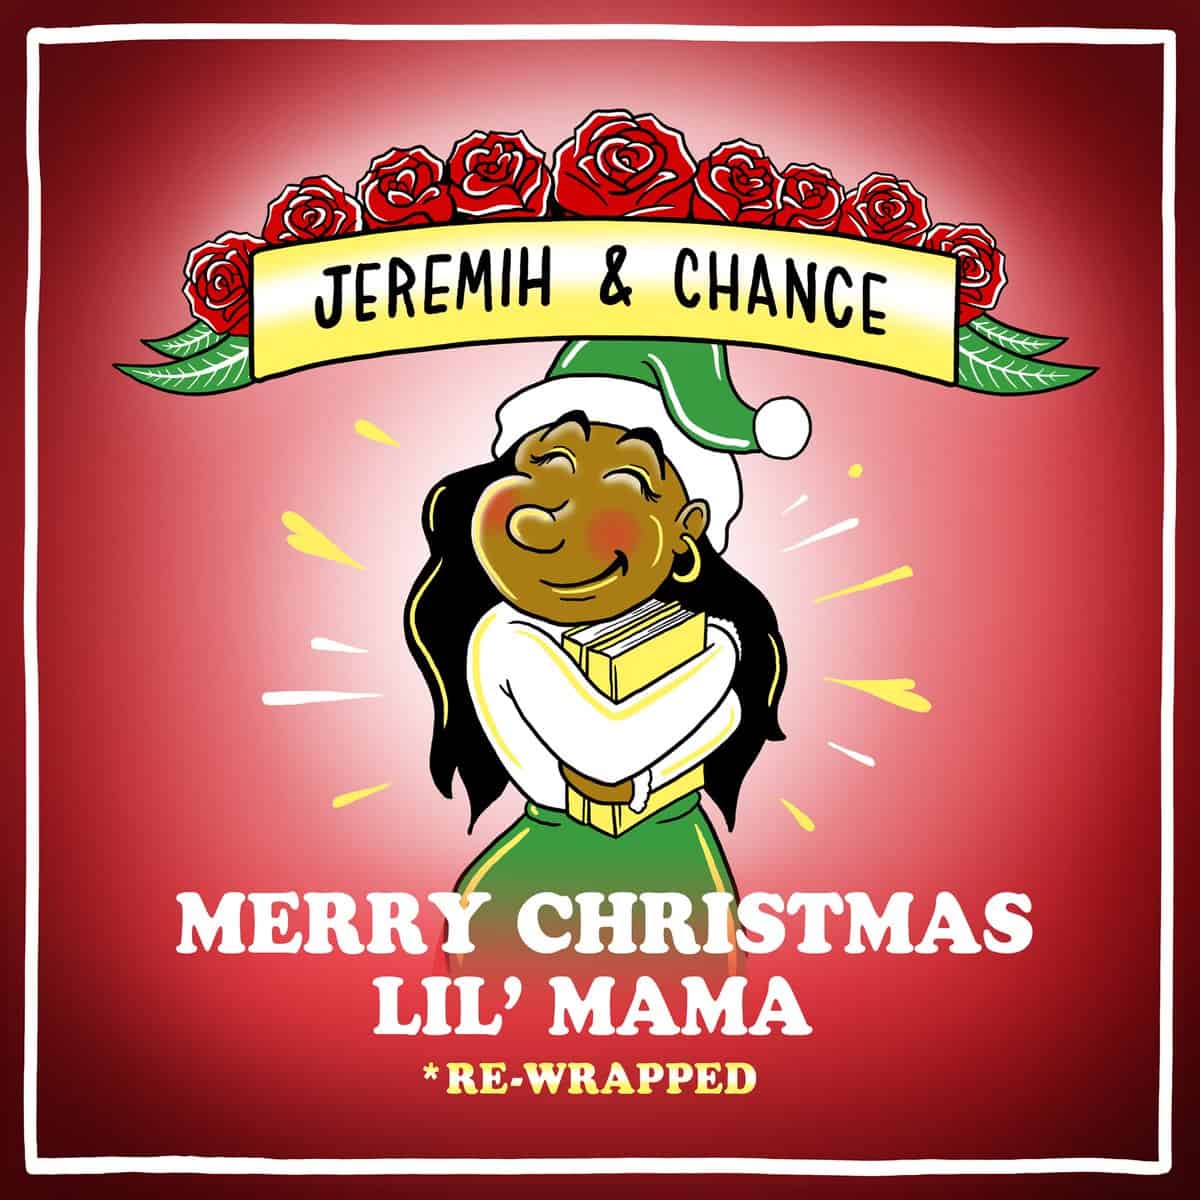 Stream Chance The Rapper & Jeremih's Merry Christmas Lil Mama Project